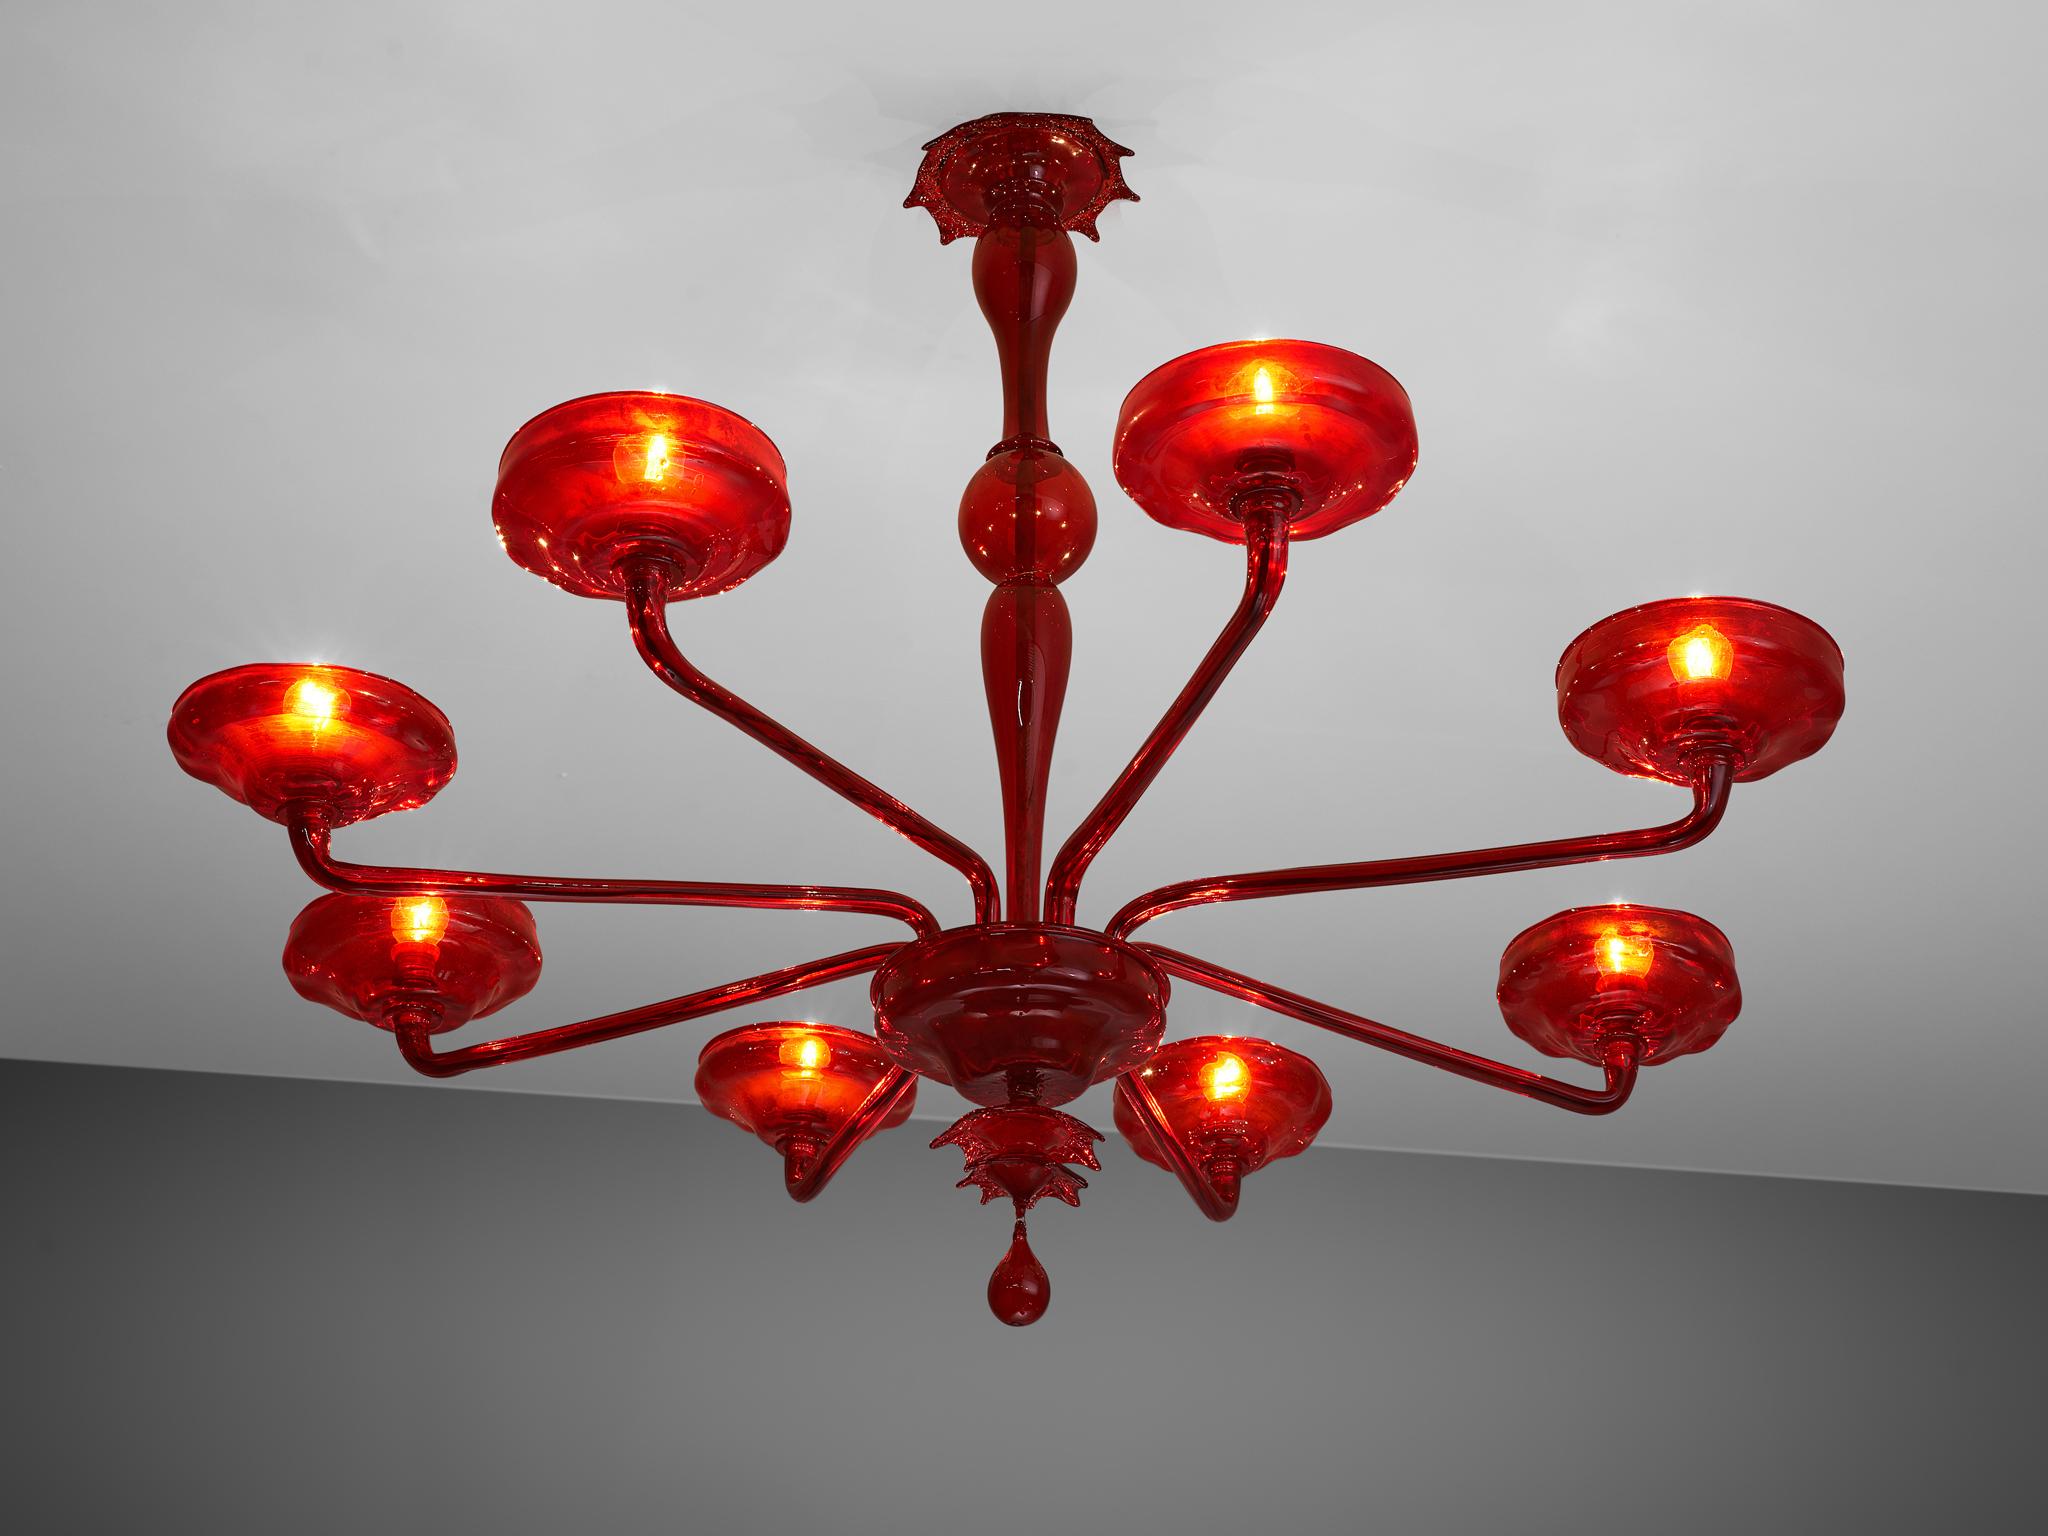  Chandelier, Murano glass, Italy, 1960s

1960s Venetian chandelier composed of ruby red Murano glass. Handcrafted and executed with modern lines in combination with the elegance of Venetian traditions. The eight long arms, each holding a bowl